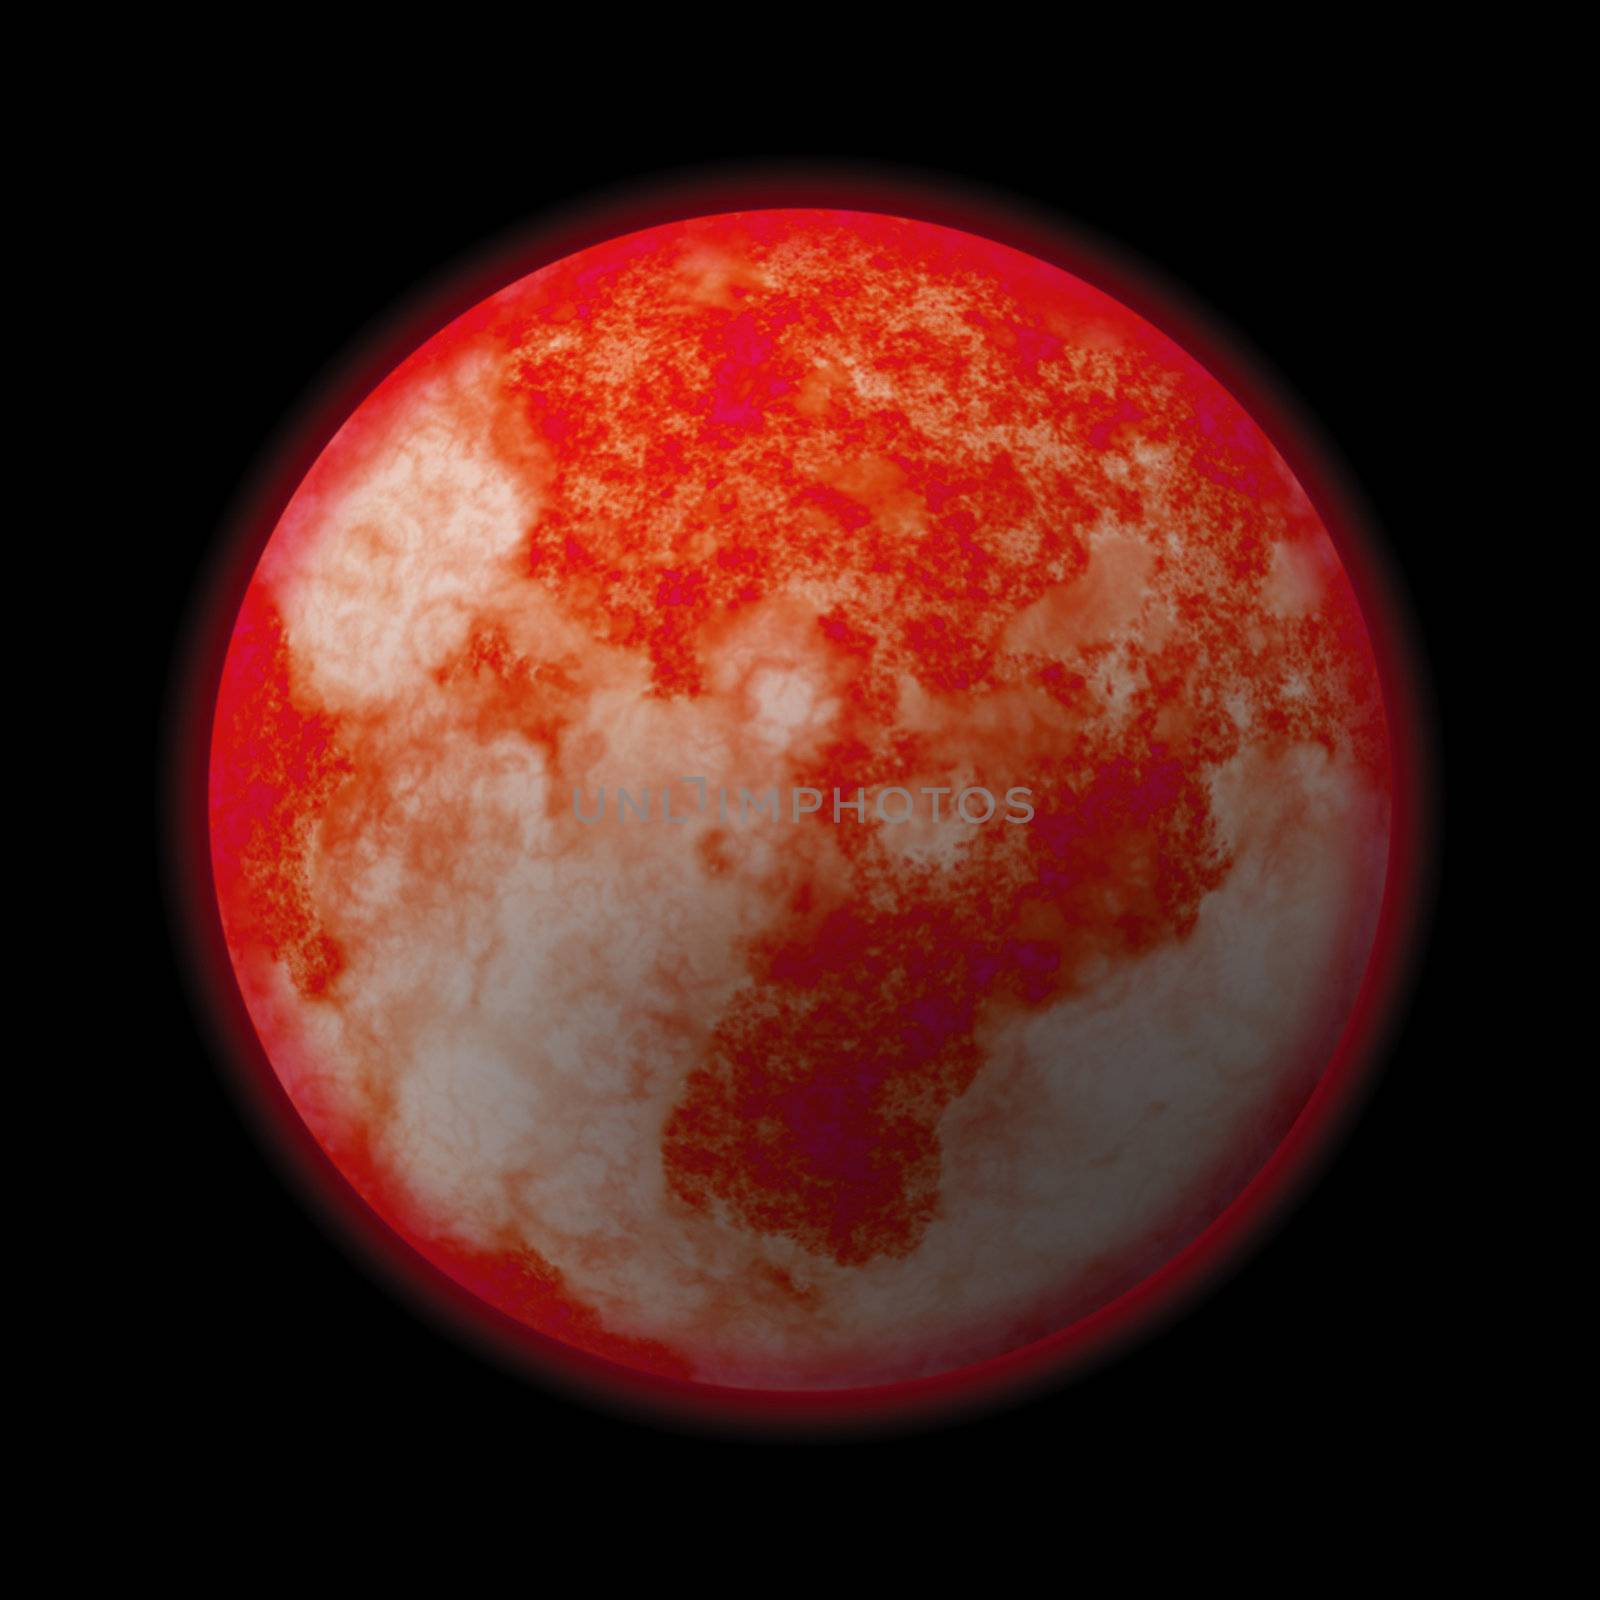 A red hot glowing planet - it works well as Mars or the Sun.